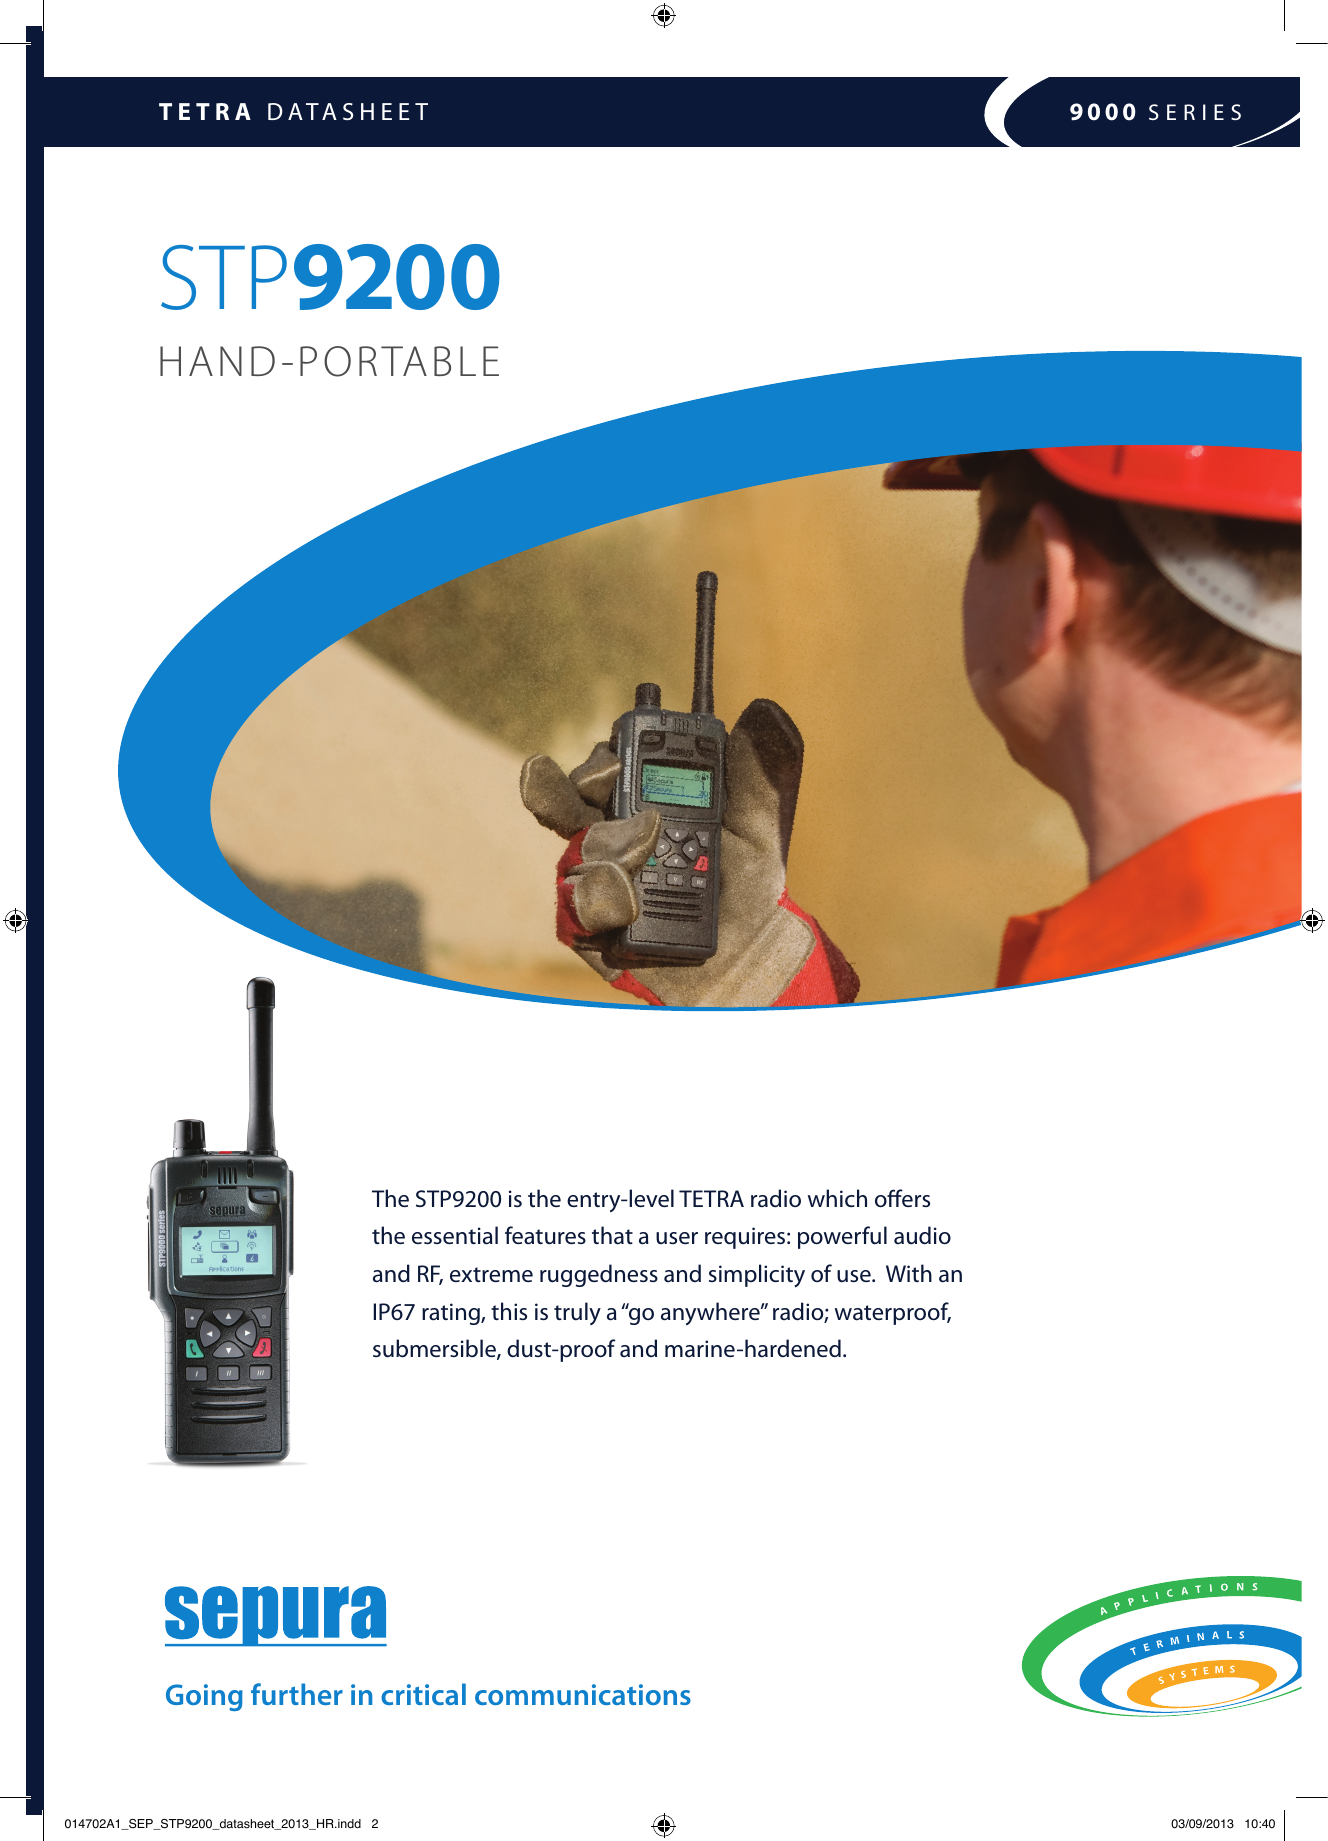 TETRA DATASHEET 9000 SERIESThe STP9200 is the entry-level TETRA radio which oﬀers the essential features that a user requires: powerful audio and RF, extreme ruggedness and simplicity of use.  With an IP67 rating, this is truly a “go anywhere” radio; waterproof, submersible, dust-proof and marine-hardened.Going further in critical communicationsSTP9200  HAND-PORTABLE014702A1_SEP_STP9200_datasheet_2013_HR.indd   2 03/09/2013   10:40